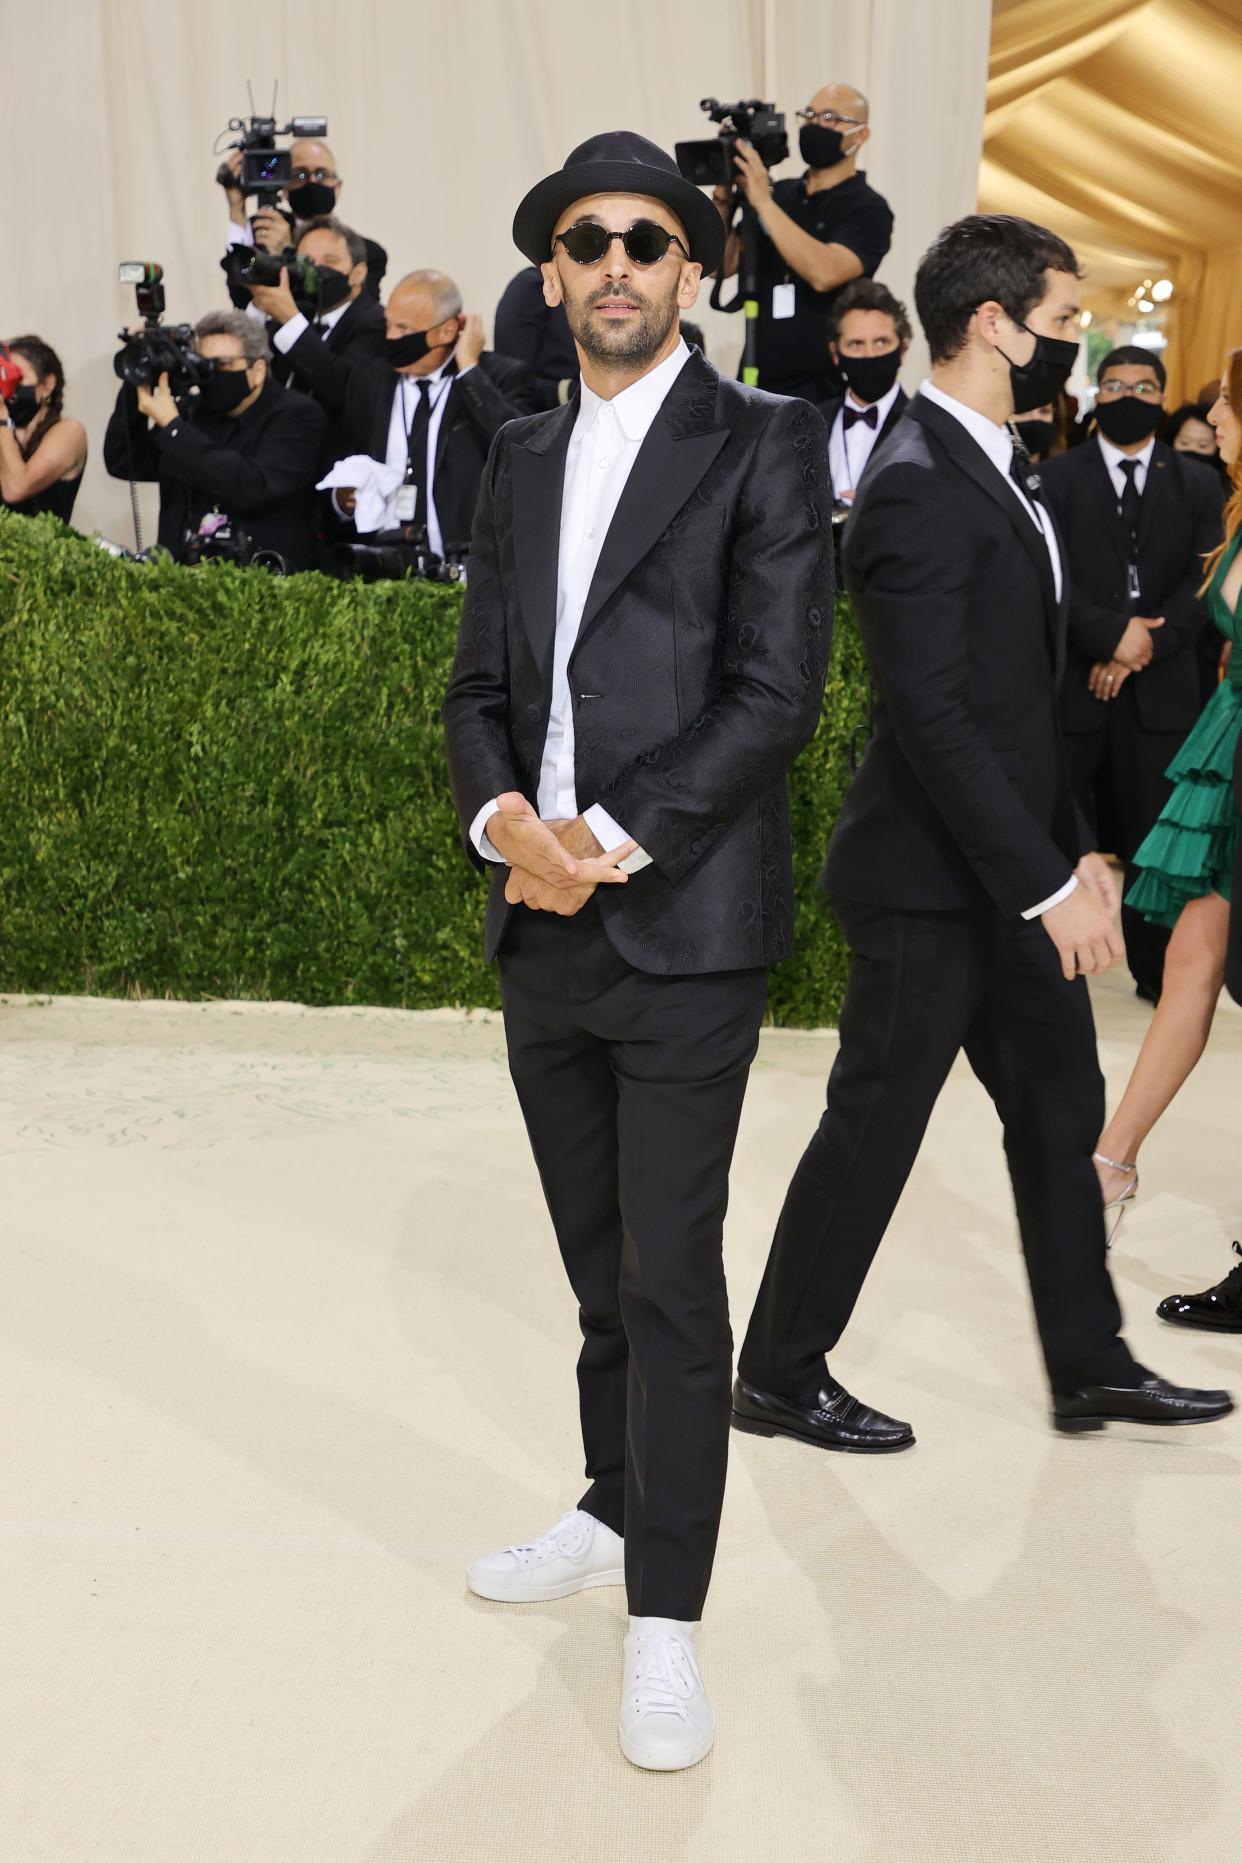 JR attends The 2021 Met Gala Celebrating In America: A Lexicon Of Fashion at Metropolitan Museum of Art on Sept. 13, 2021 in New York.